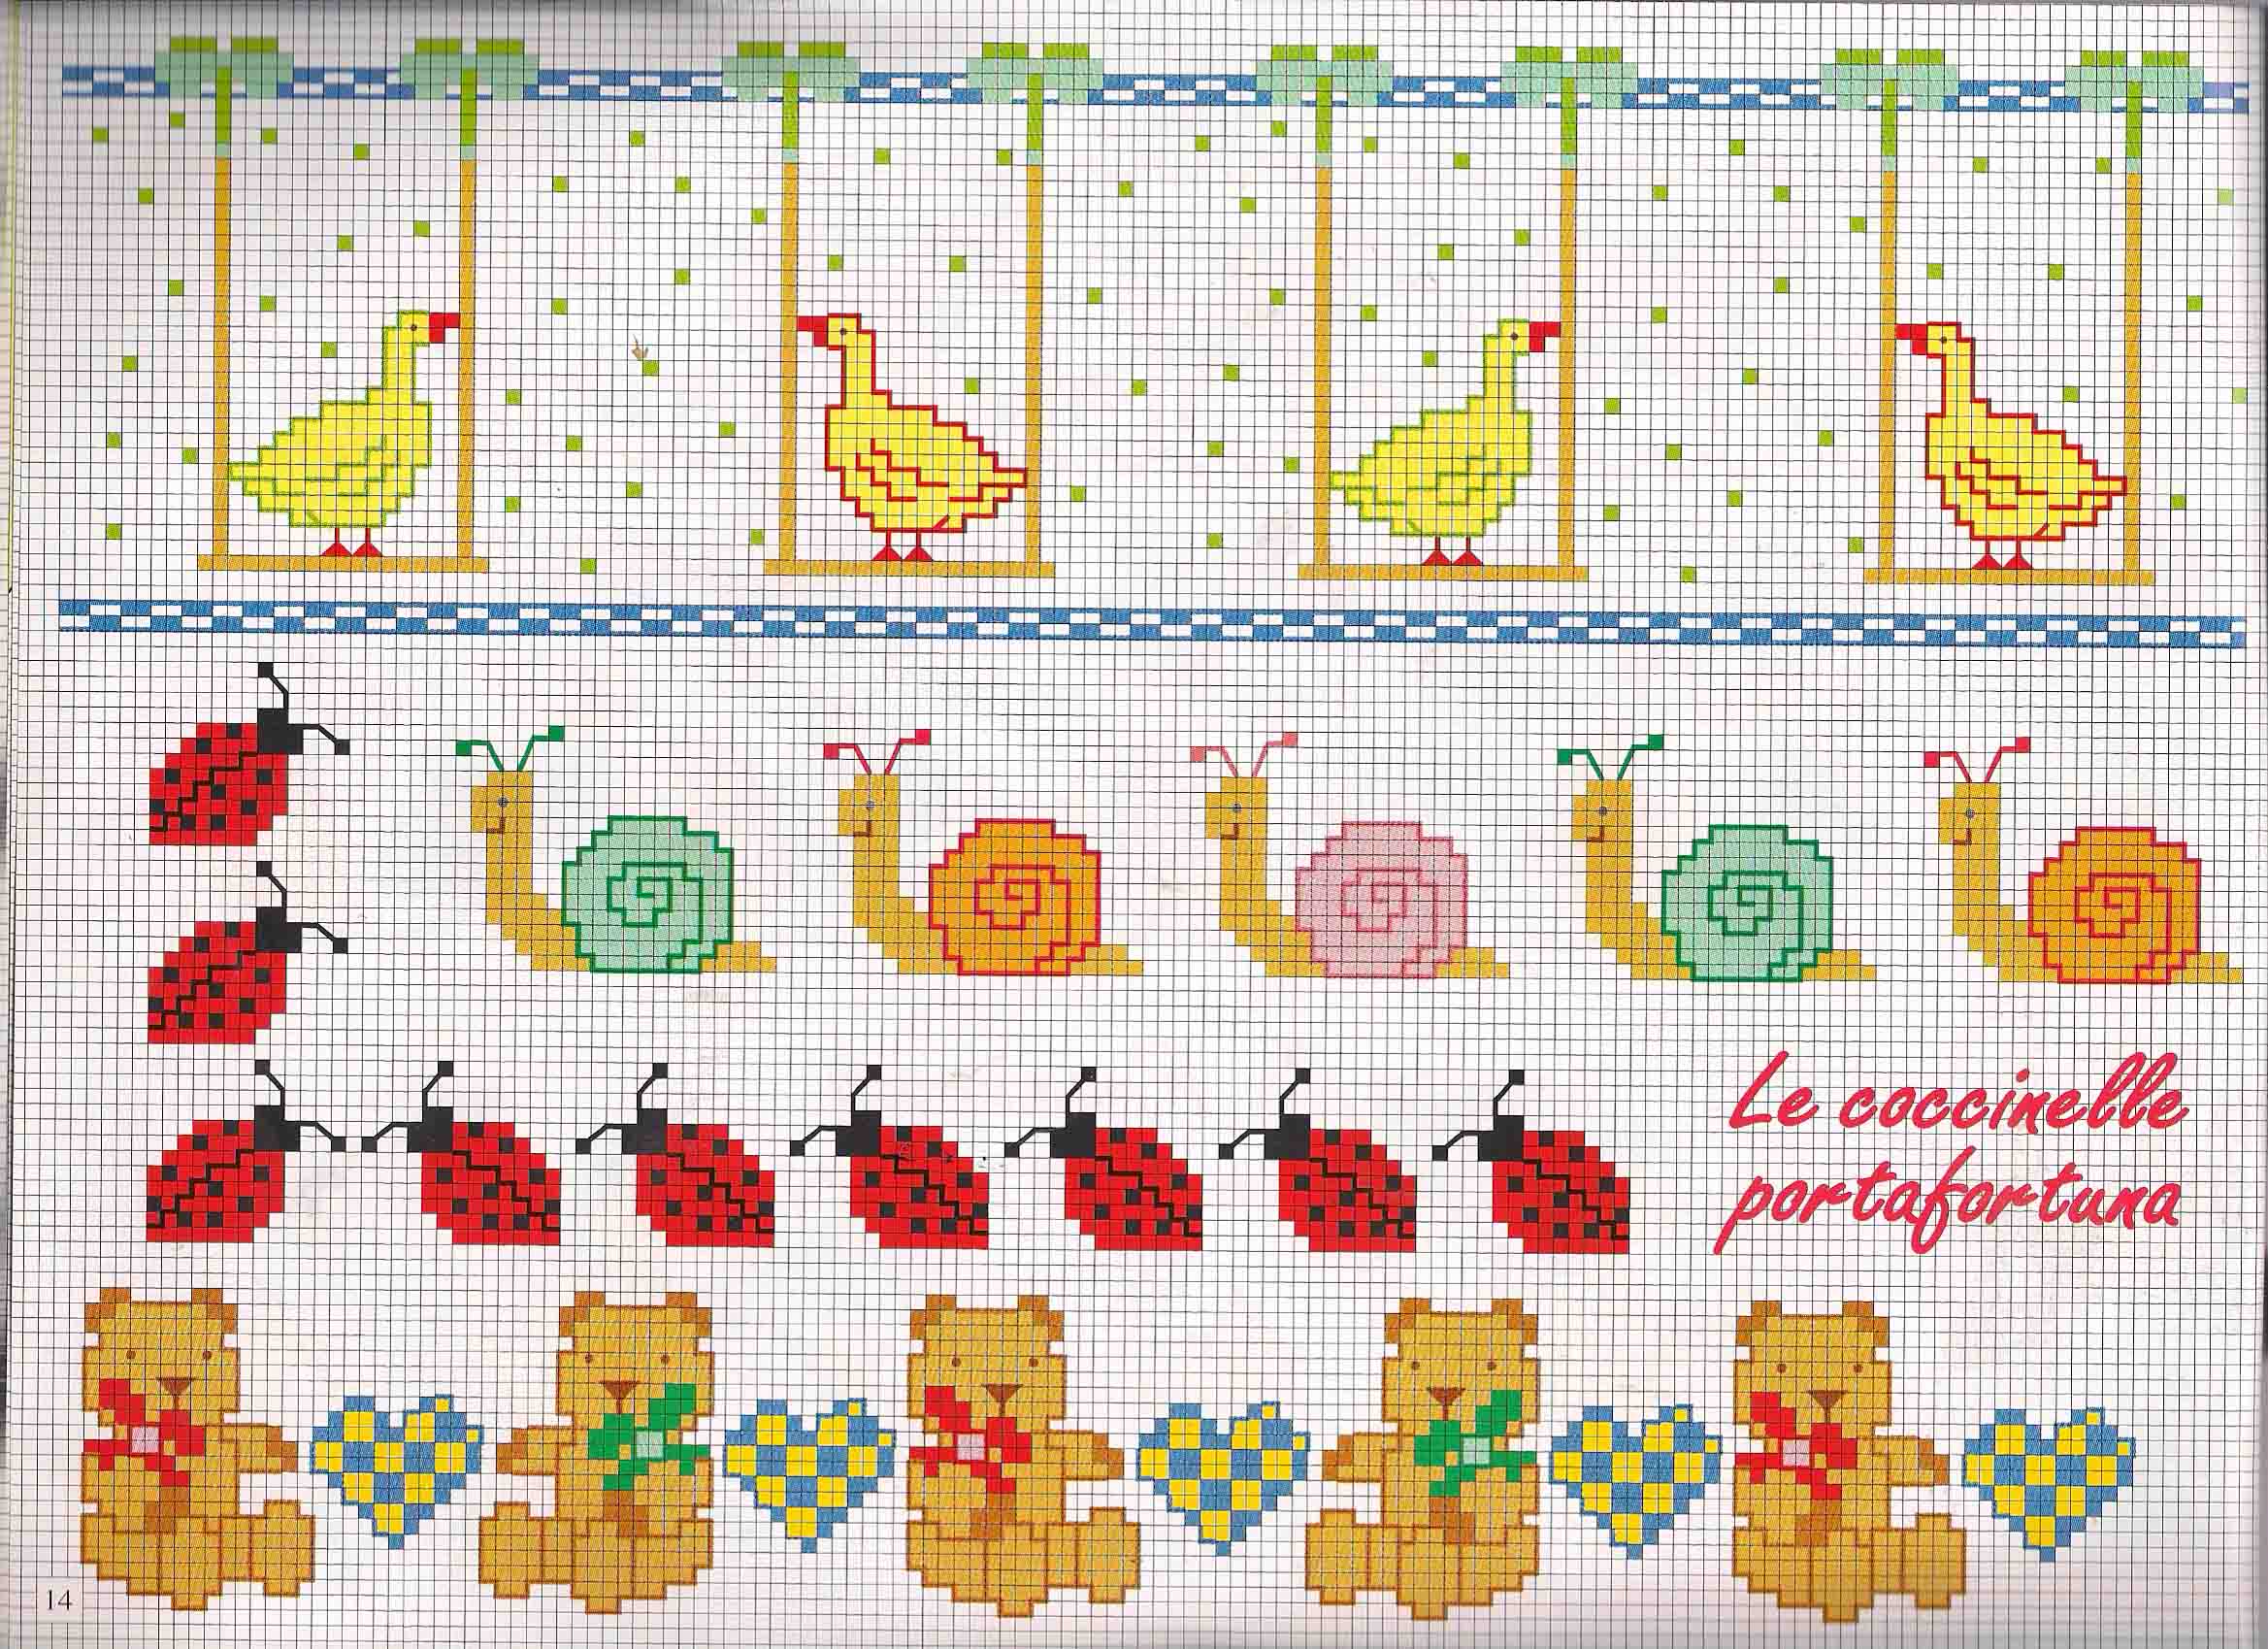 Baby cross stitch borders withladybugs and snails